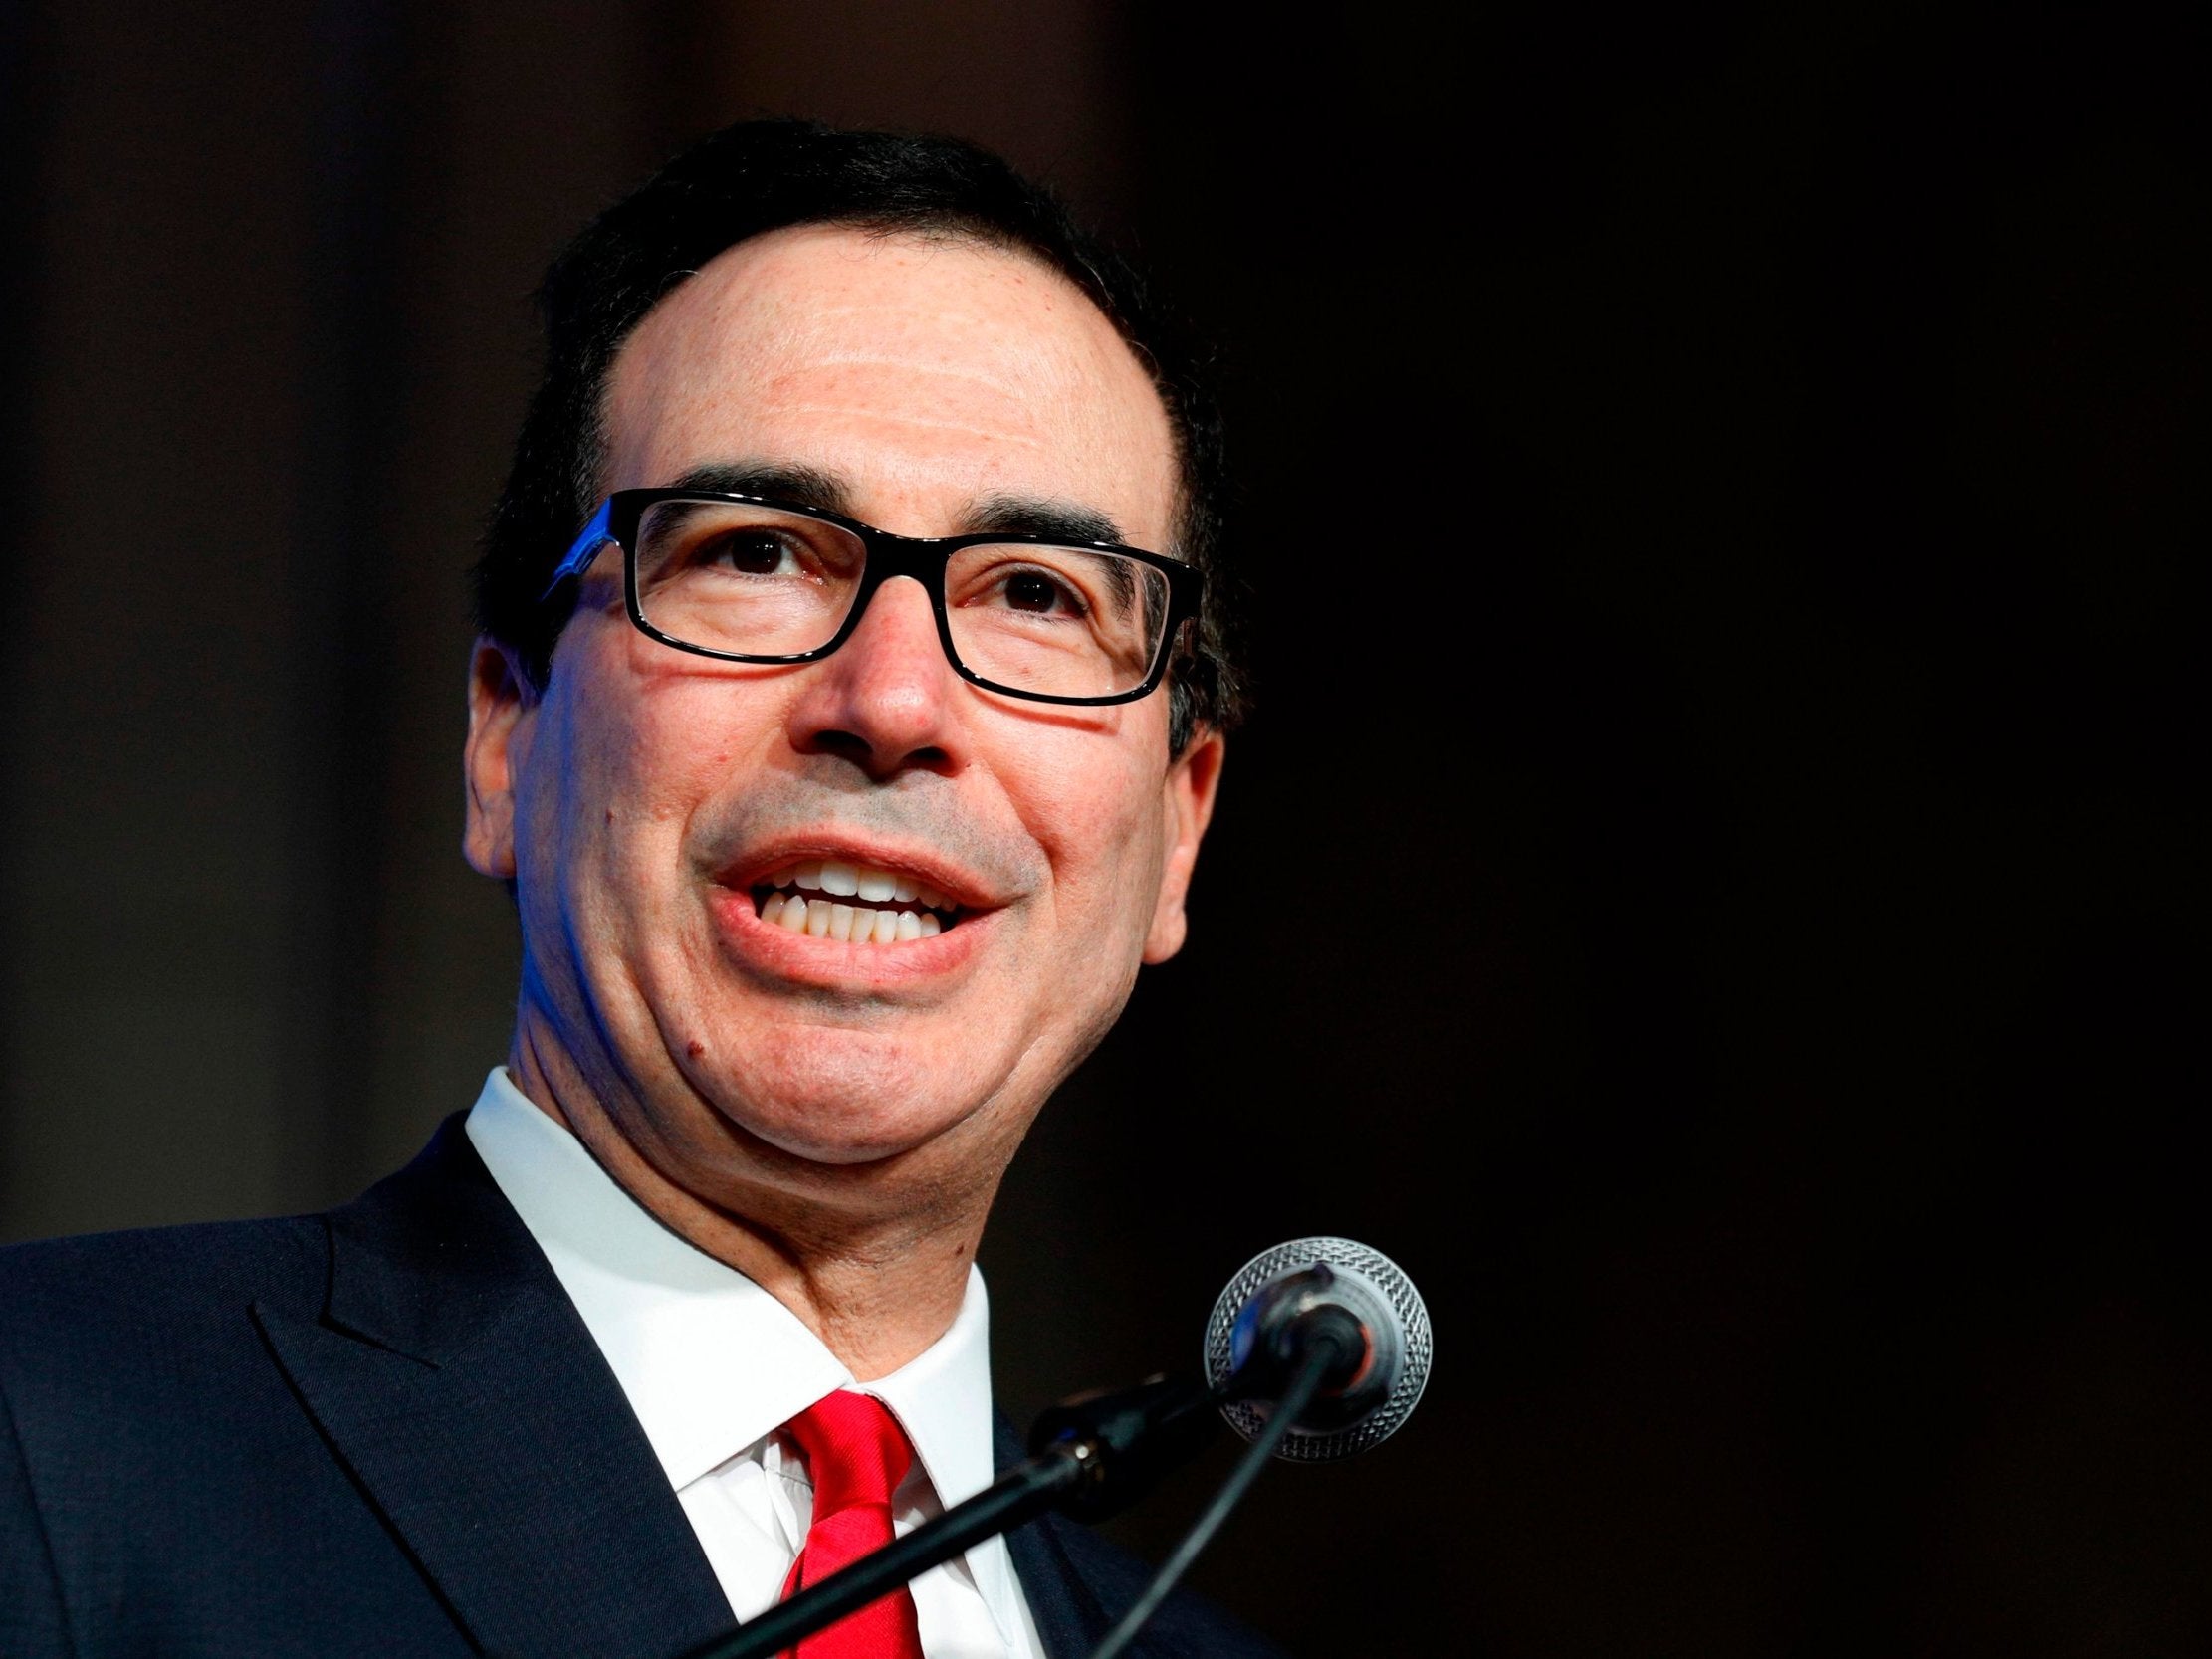 Mr Mnuchin decided not to attend after meeting with the president and US secretary of State